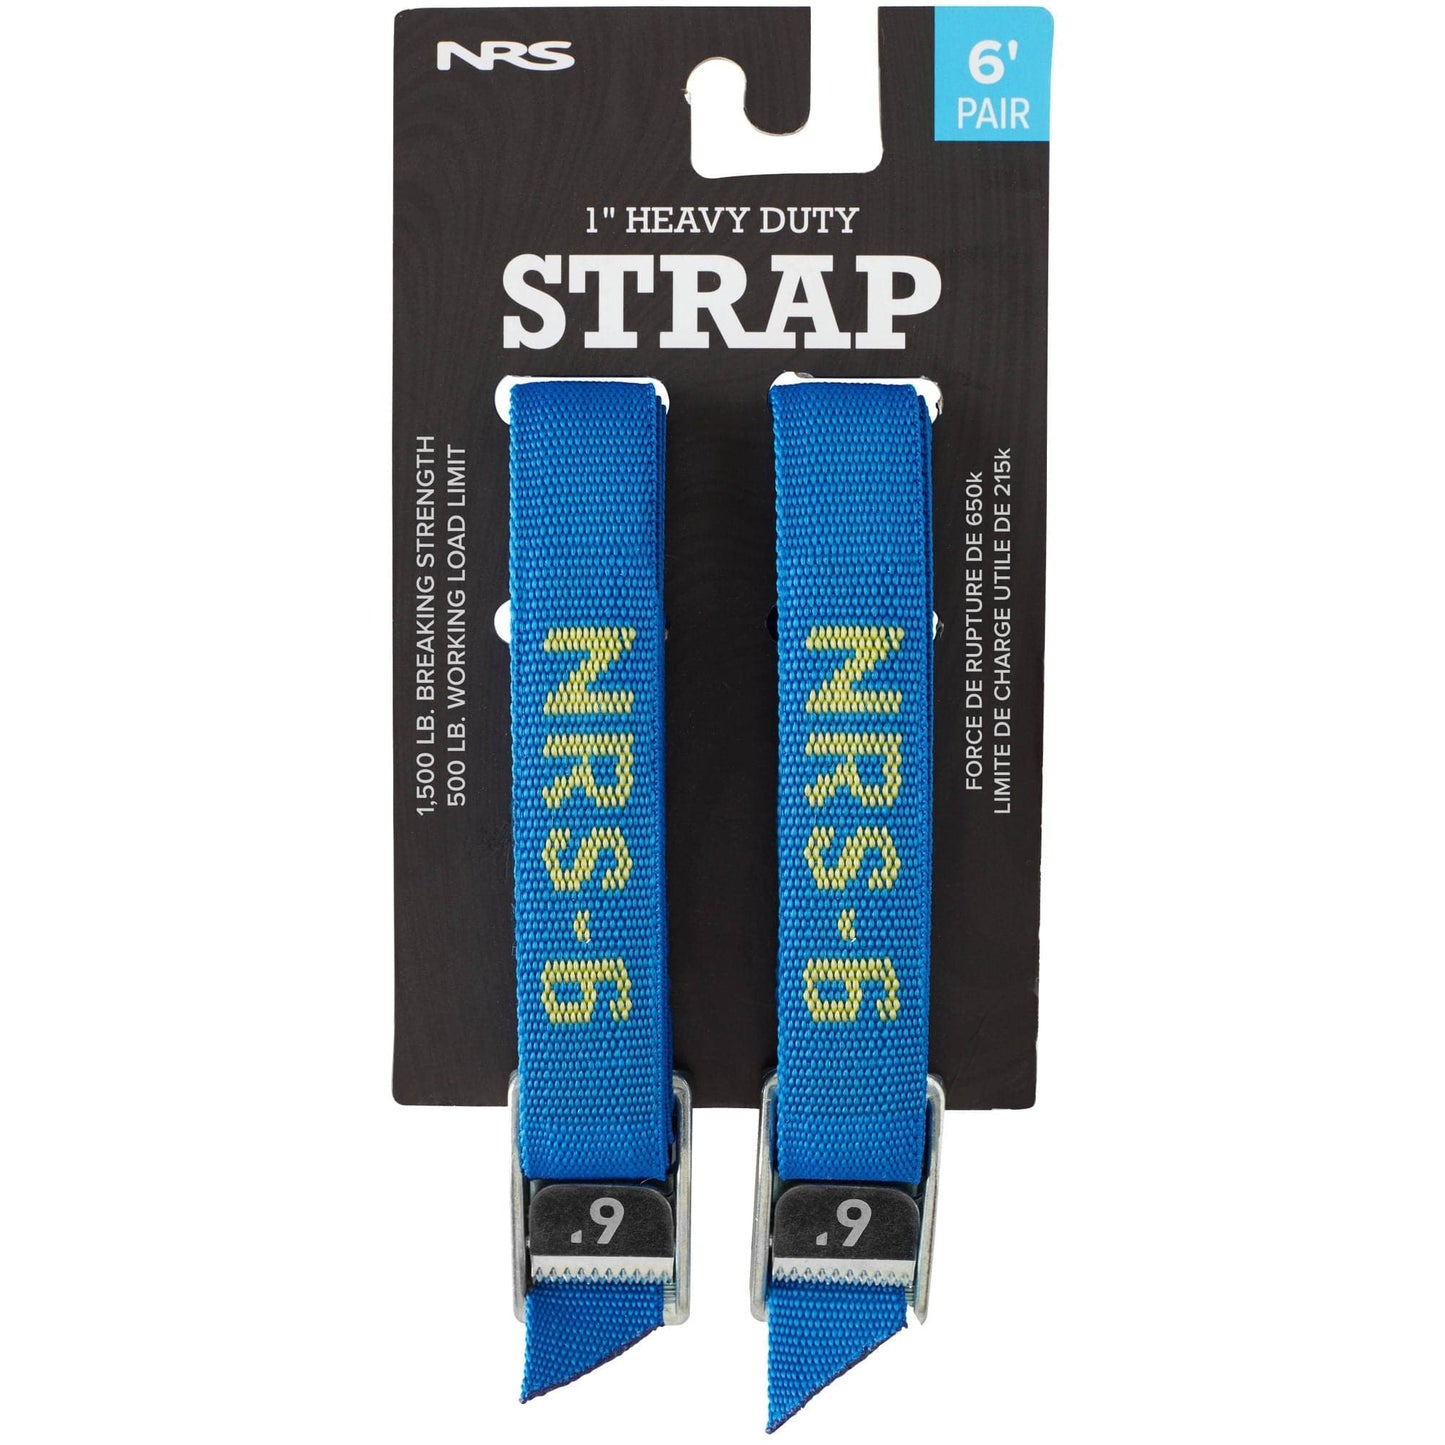 Featuring the HD Cam Straps cam strap, raft rigging manufactured by NRS shown here from a third angle.